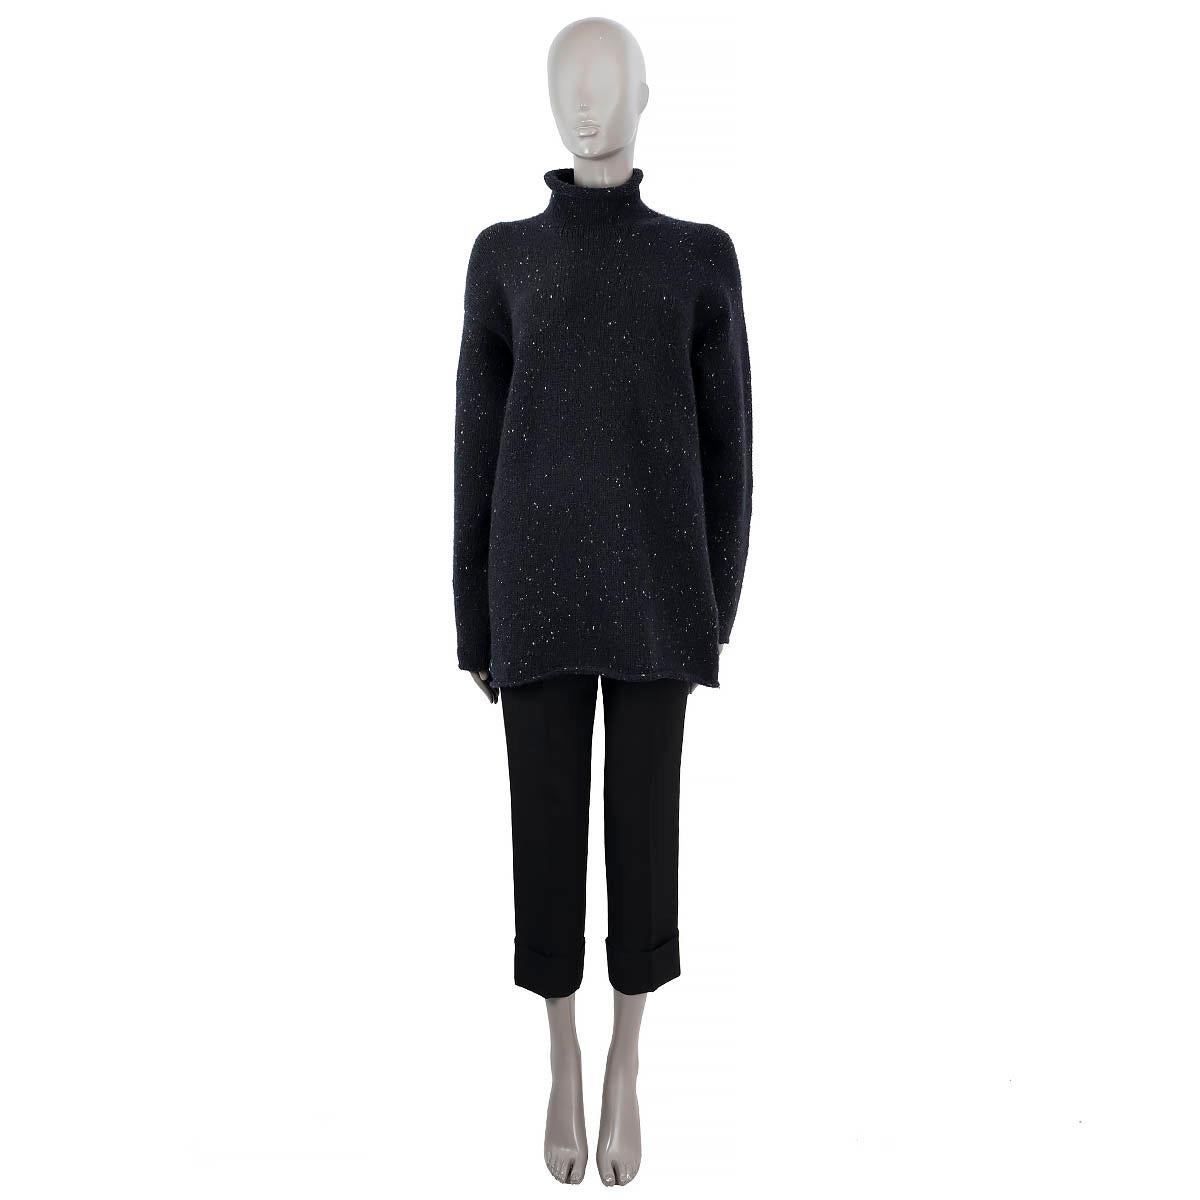 100% authentic Hermès speckled sweater in black and white cashmere (96%) and polyester (4%). Featured are turtelneck and knitted rolled edges. Medium weight. Has been worn and is in excellent condition.

Measurements
Tag Size	XL
Size	XL
Shoulder